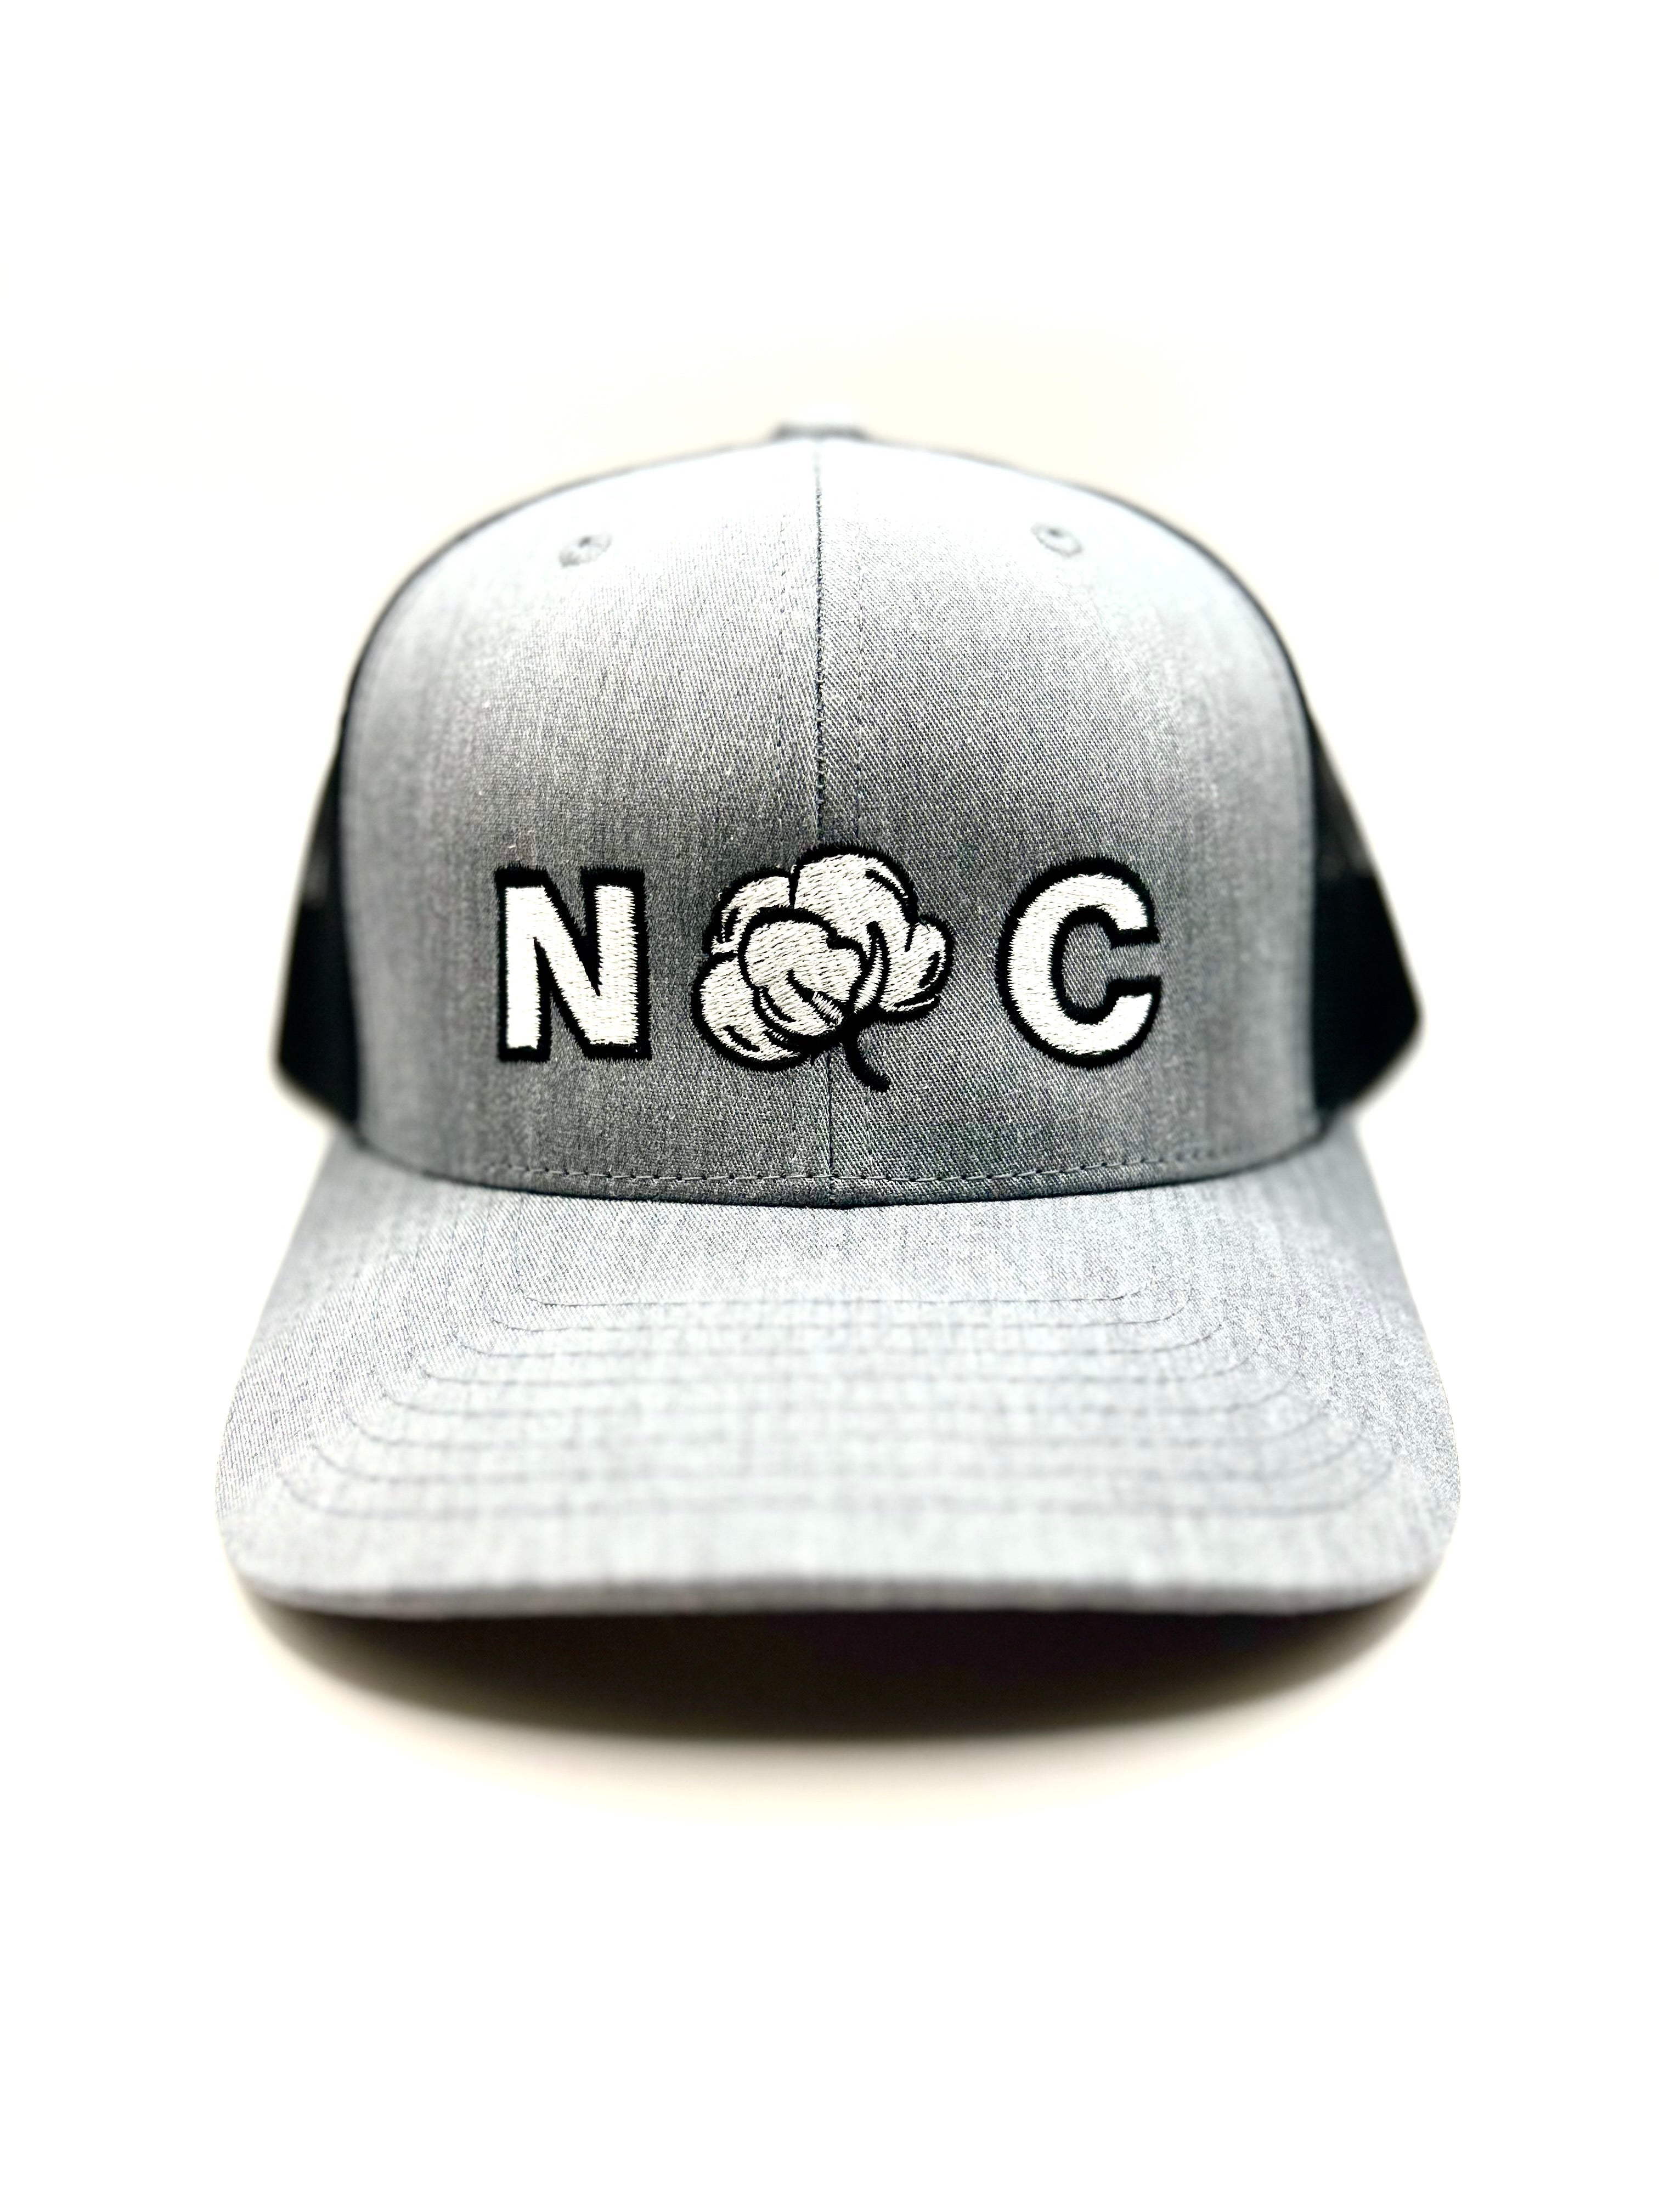 NC Cotton Hat Embroidered